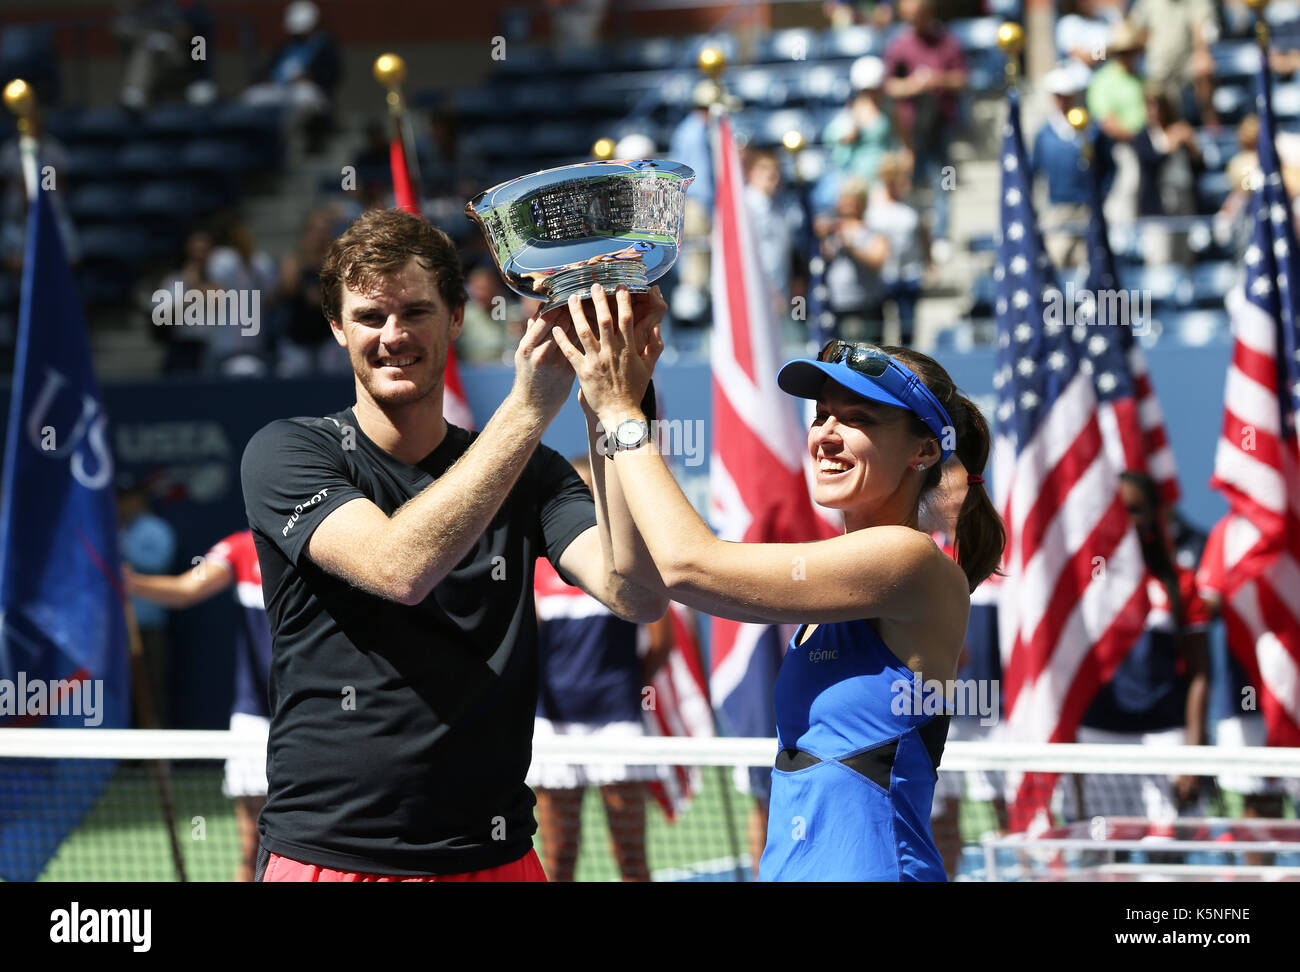 New York, USA. 9th Sep, 2017. Martina Hingis (R) of Switzerland and Jamie Murray of Great Britain attend the awarding ceremony after their mixed doubles final match against Hao-Ching Chan of Chinese Taipei and Michael Venus of New Zealand at the 2017 US Open in New York, the United States, Sept. 9, 2017. Martina Hingis and Jamie Murray won 2-1 to claim the title. Credit: Qin Lang/Xinhua/Alamy Live News Stock Photo